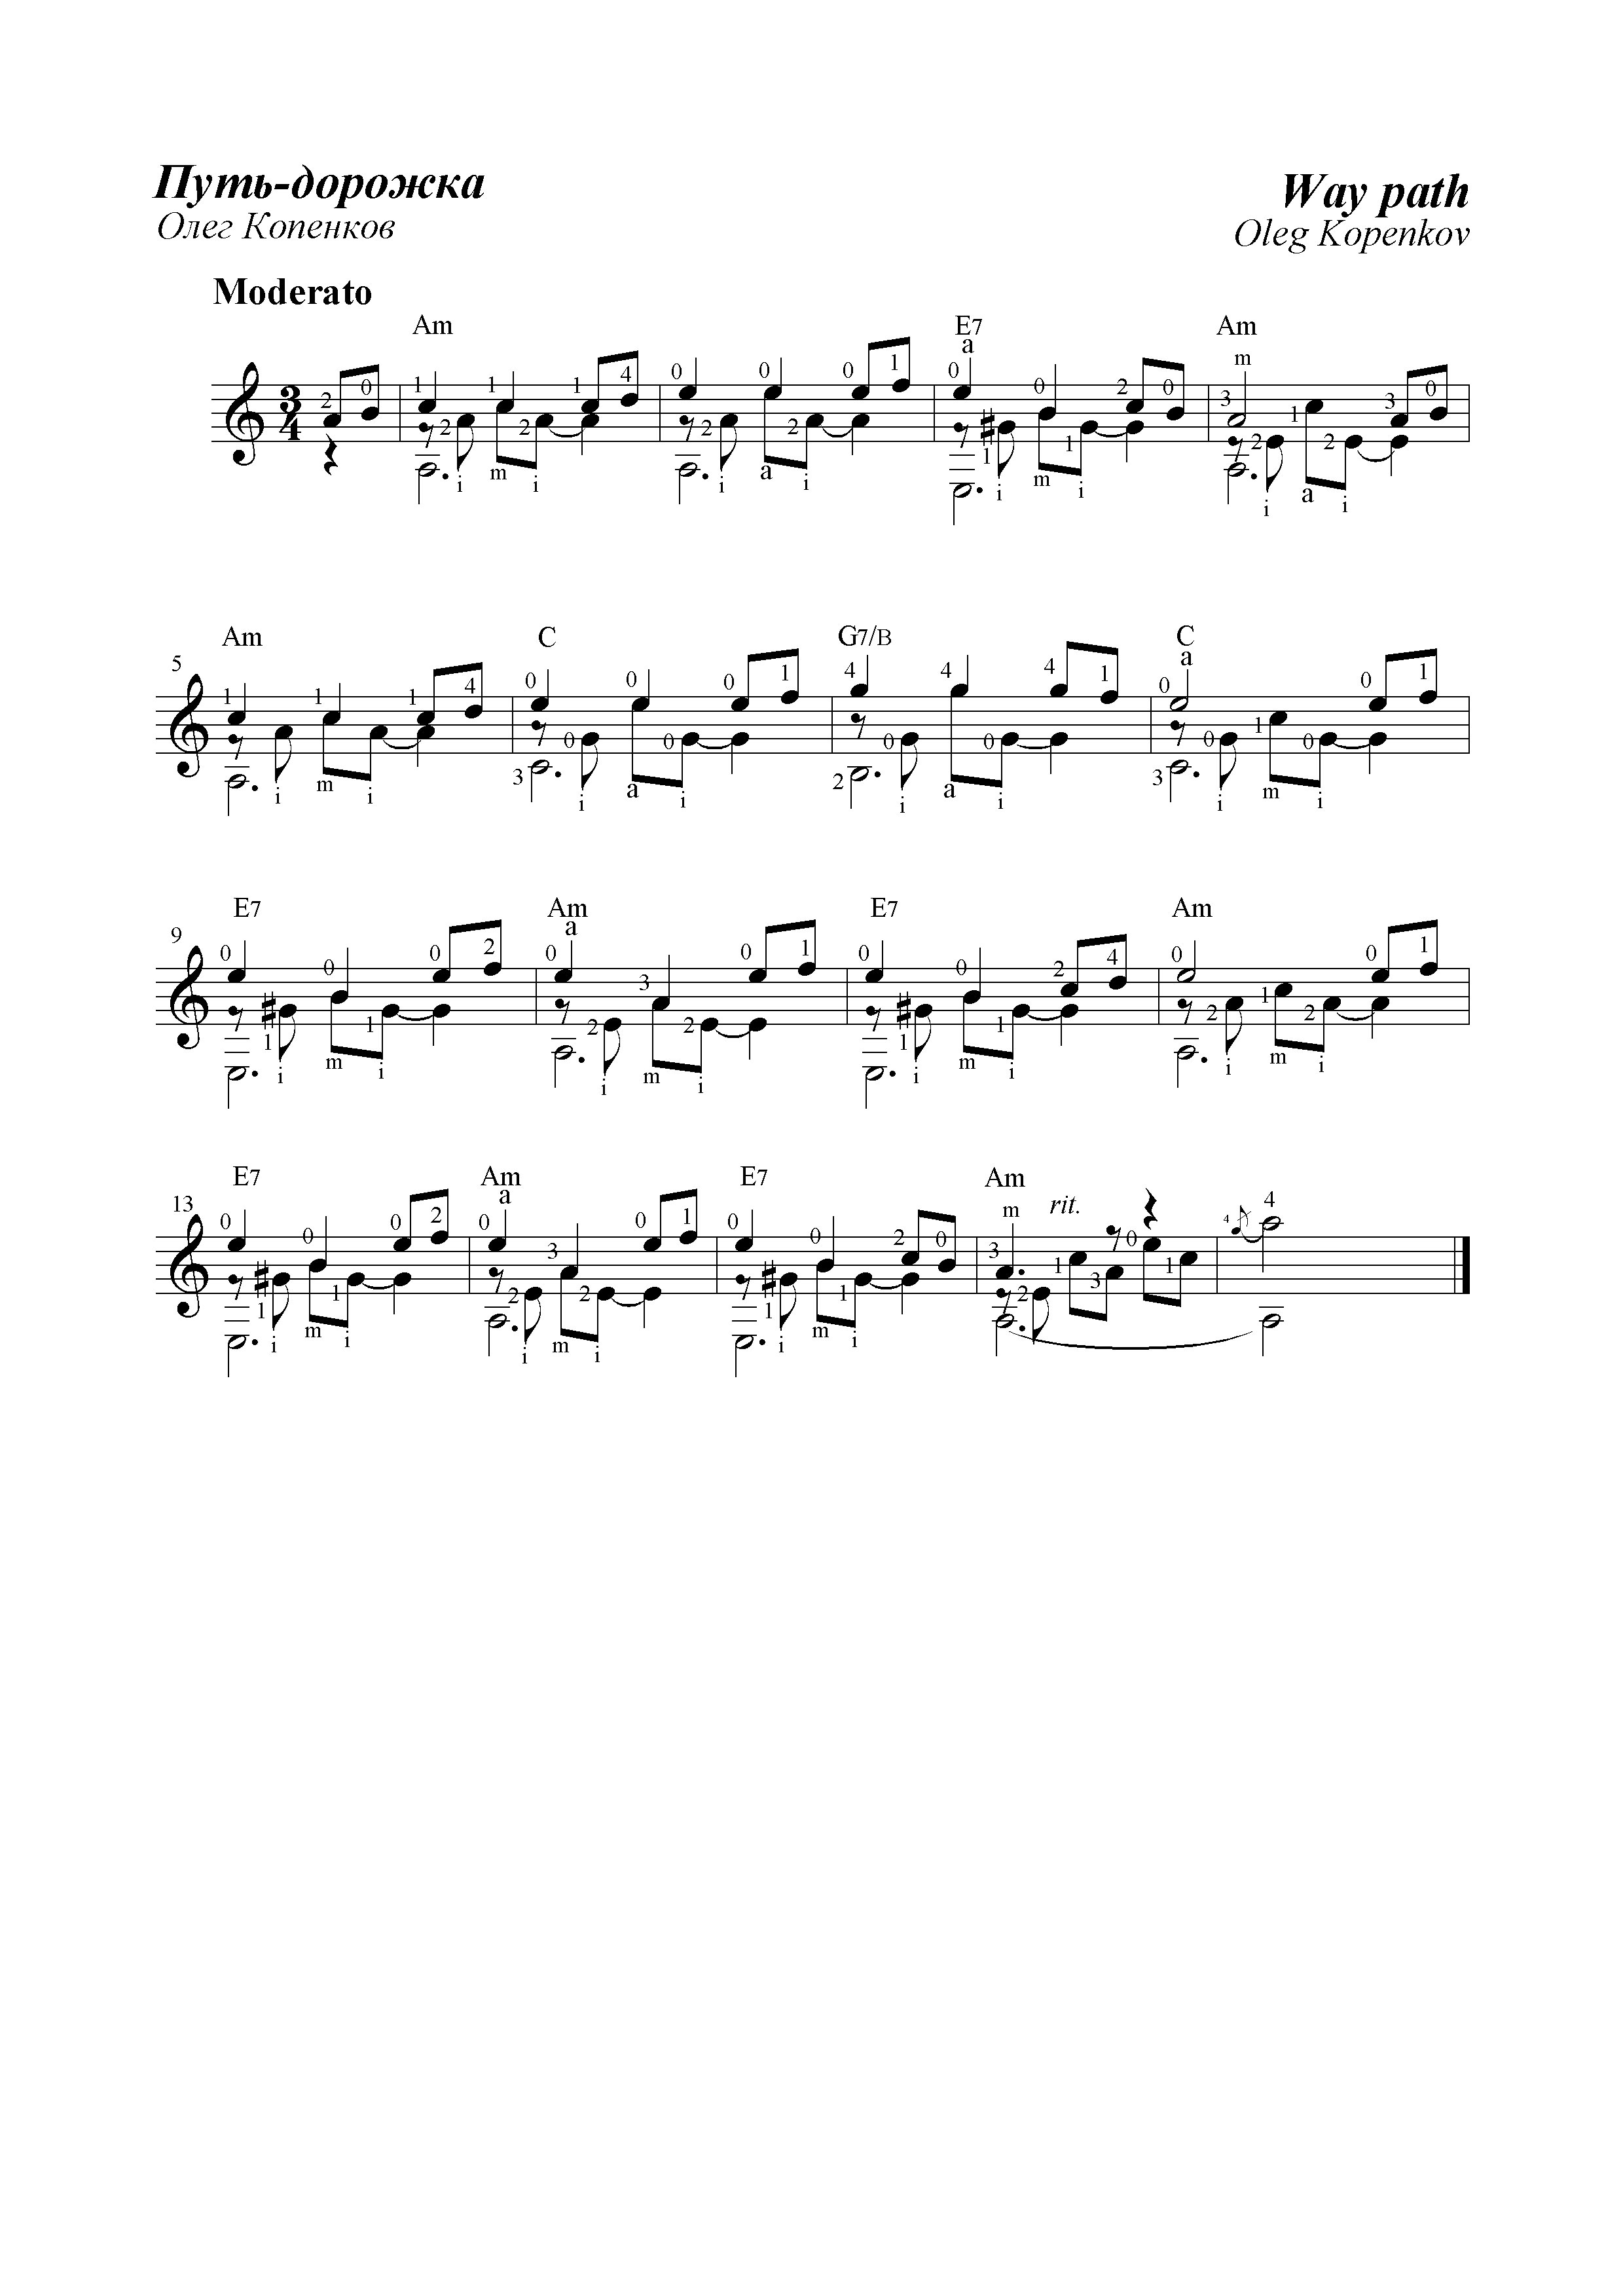 Hey There Delilah Chords